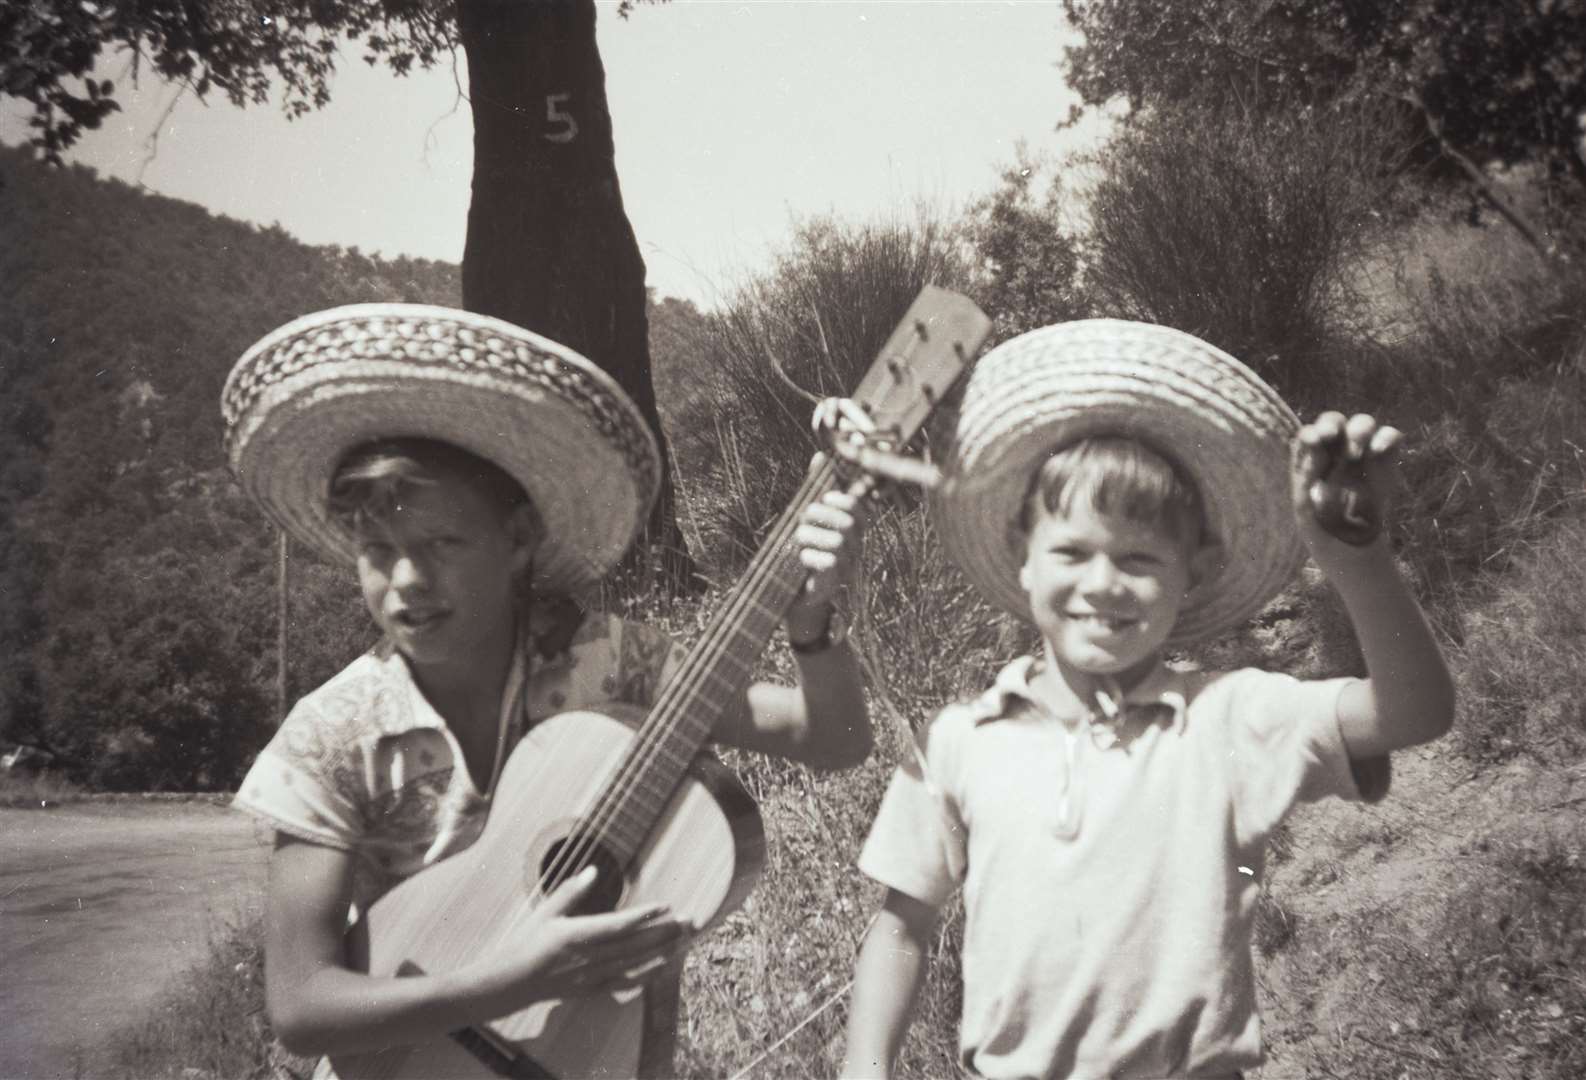 A young Chris Jagger (right) with brother Mick. Image from Talking to Myself, by Chris Jagger